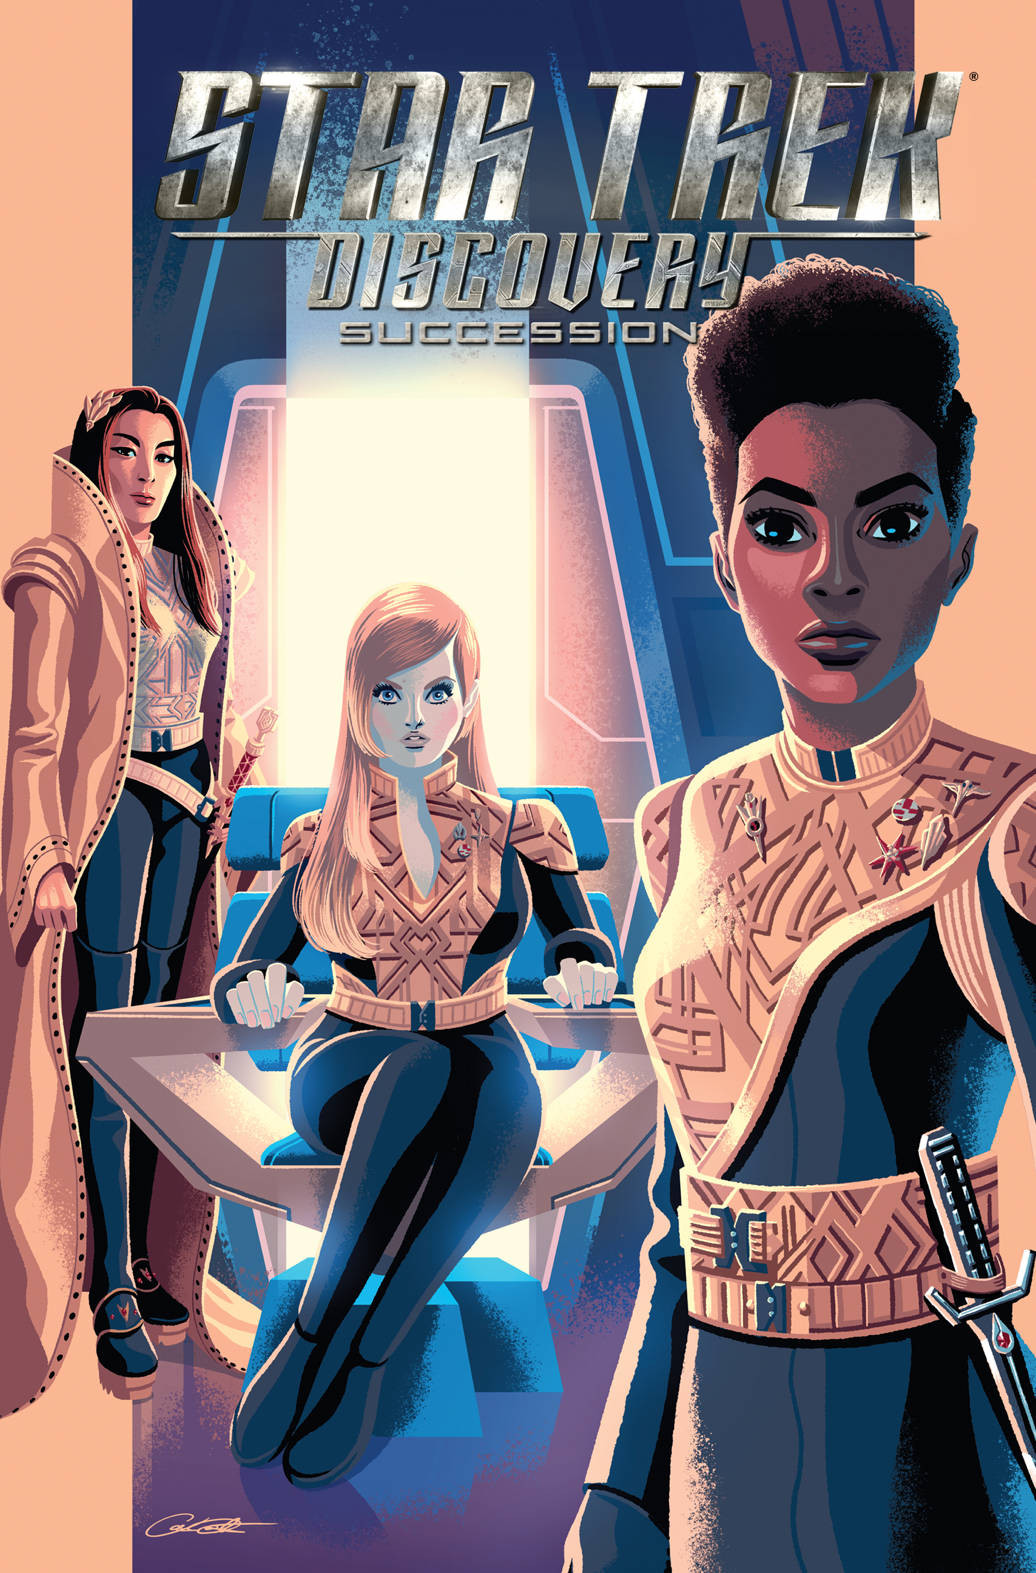 Star Trek Discovery Succession Graphic Novel